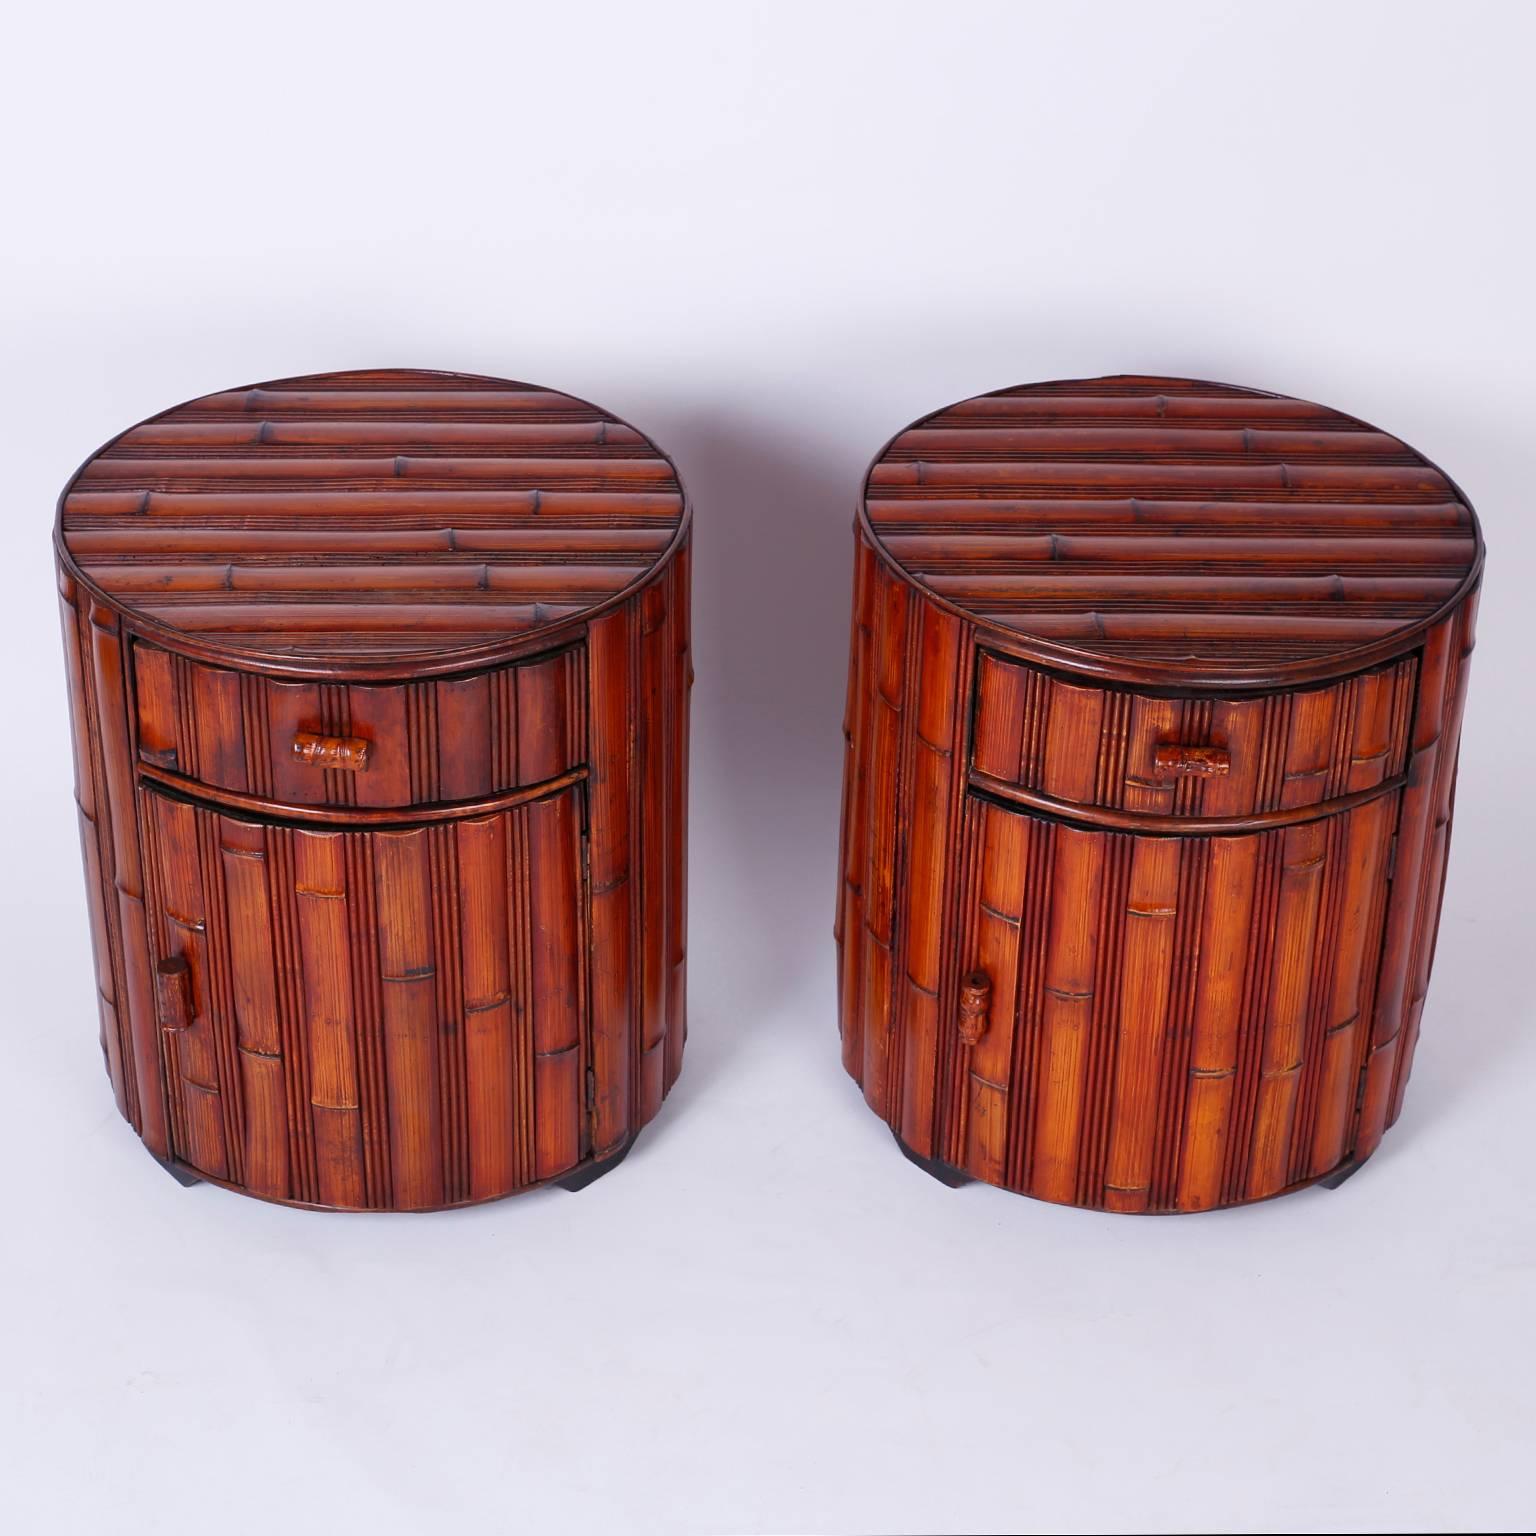 Stand out pair of round stands crafted with bamboo and having a drawer and storage compartment below. Finished all around with exotic earthy flavor.